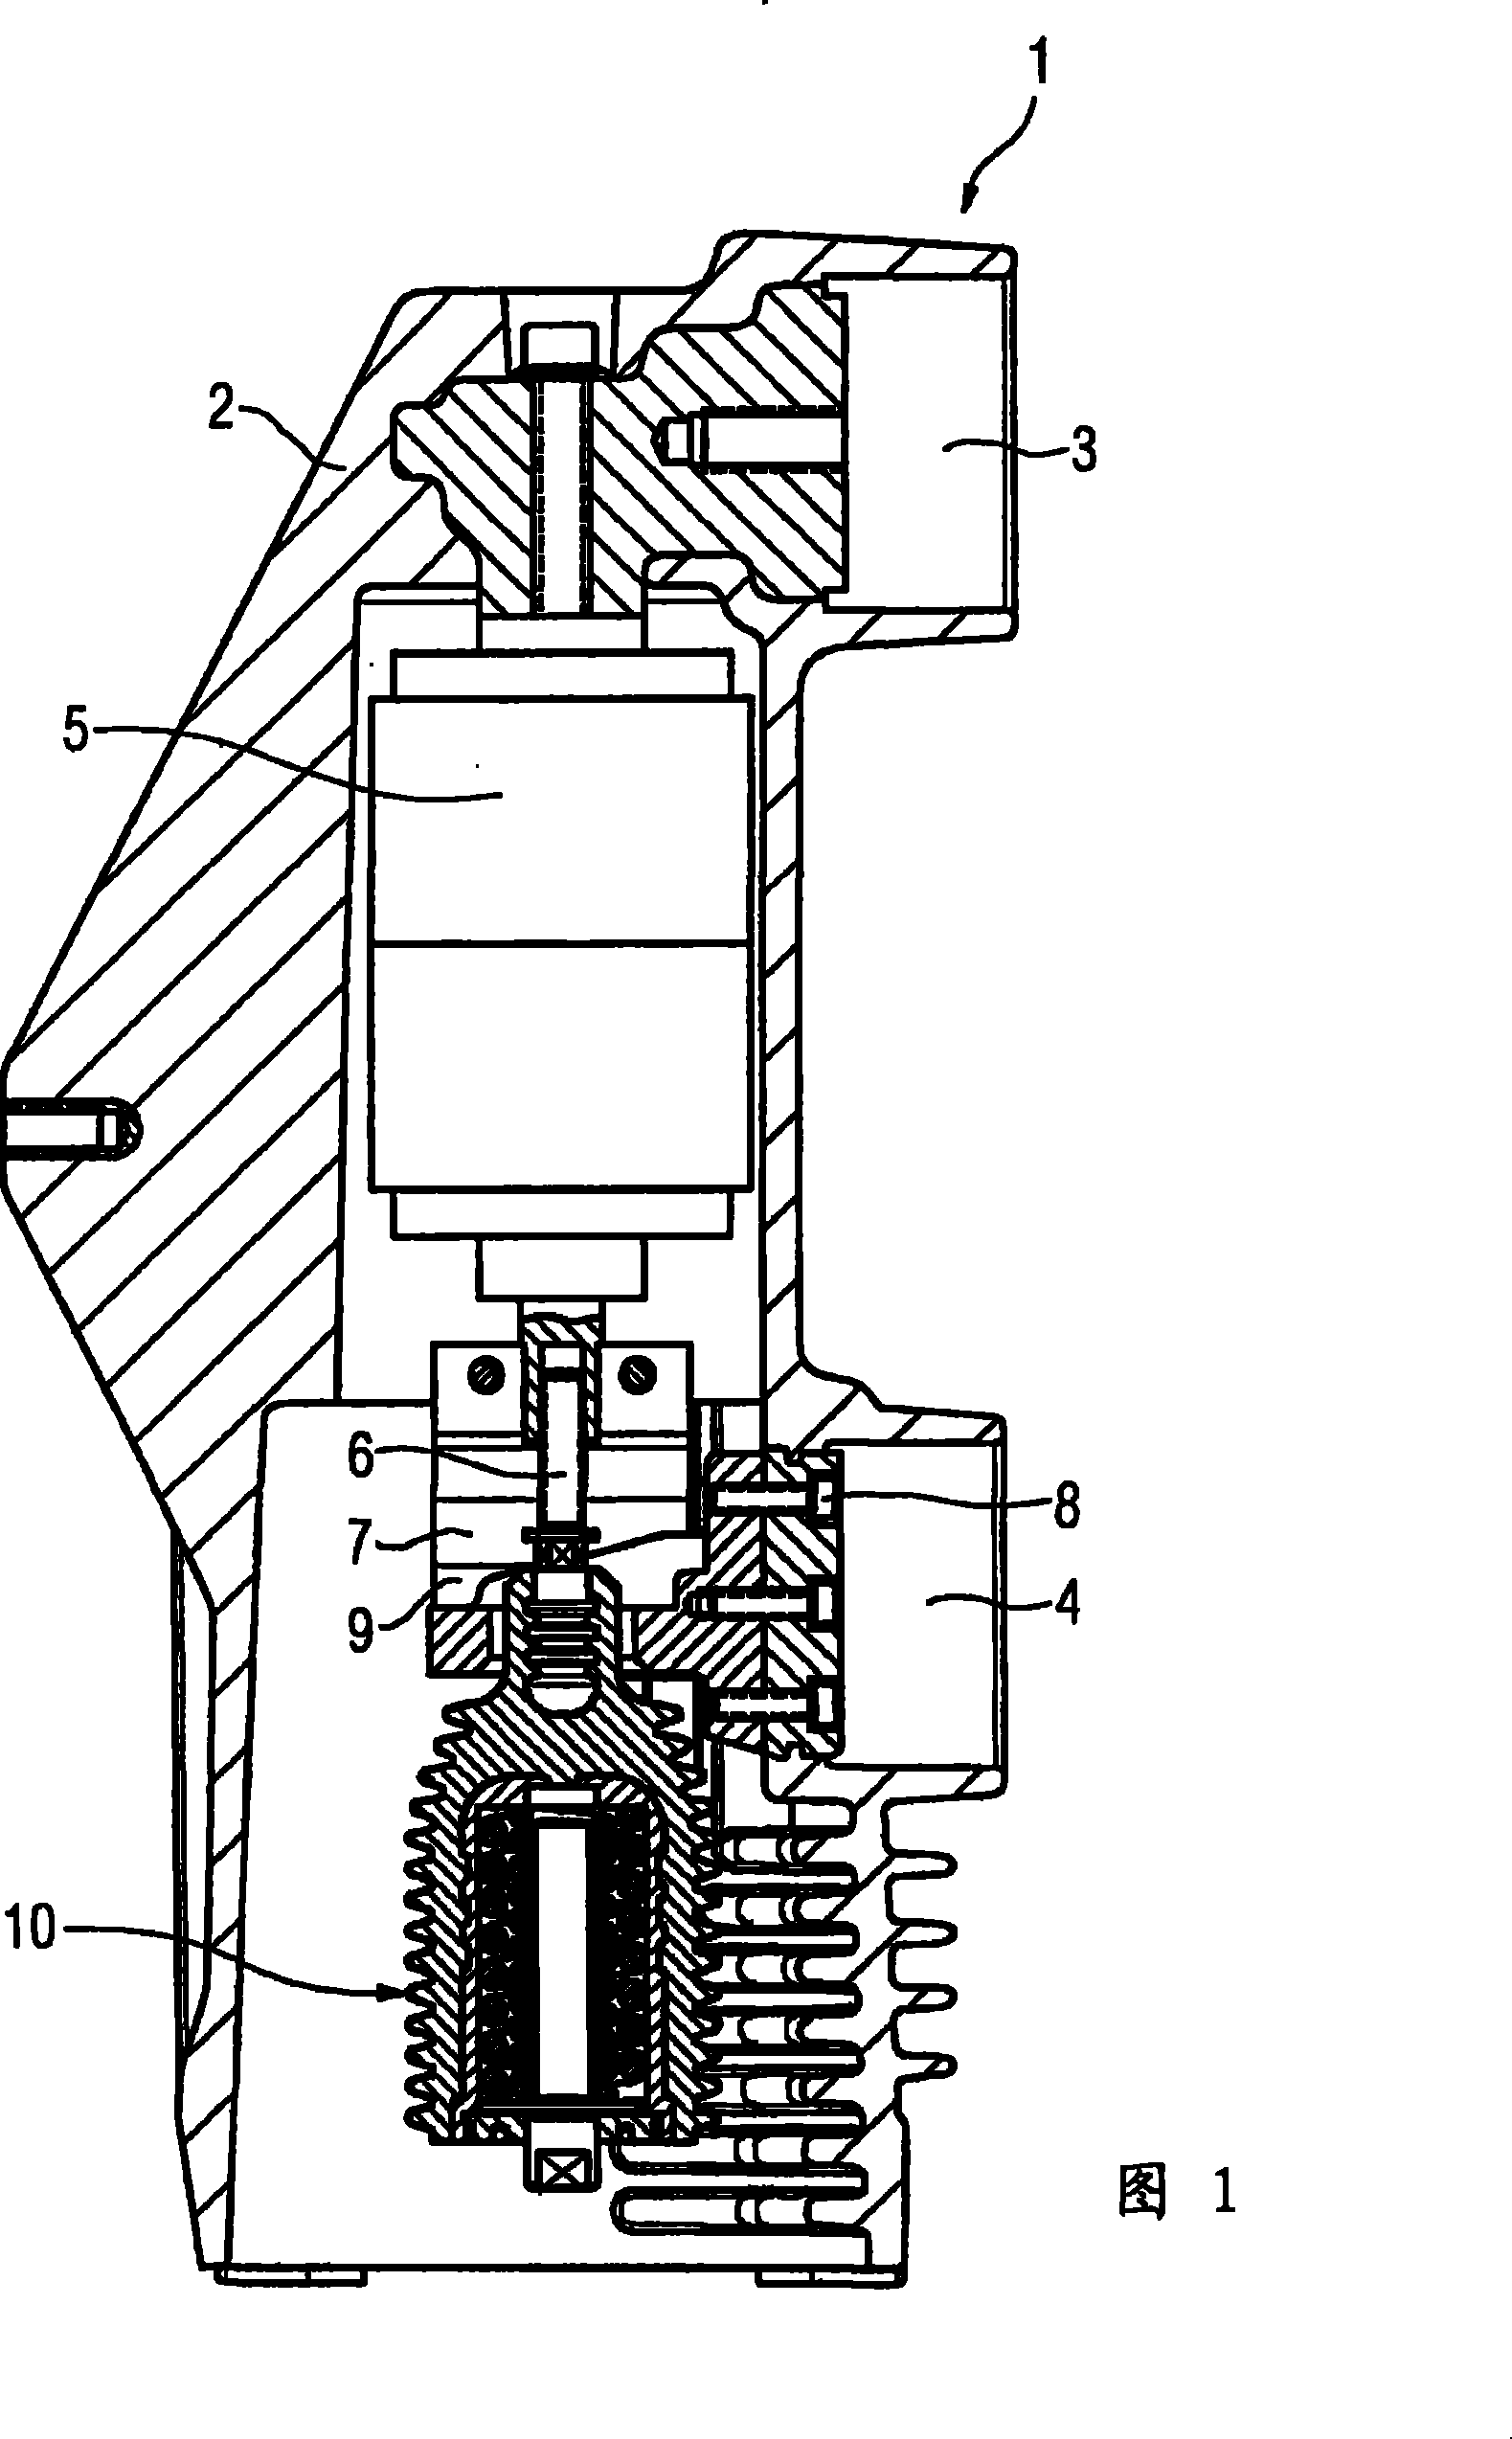 Insulating switching rod with a contact pressure arrangement comprising a plurality of helical compression springs wound in opposite senses